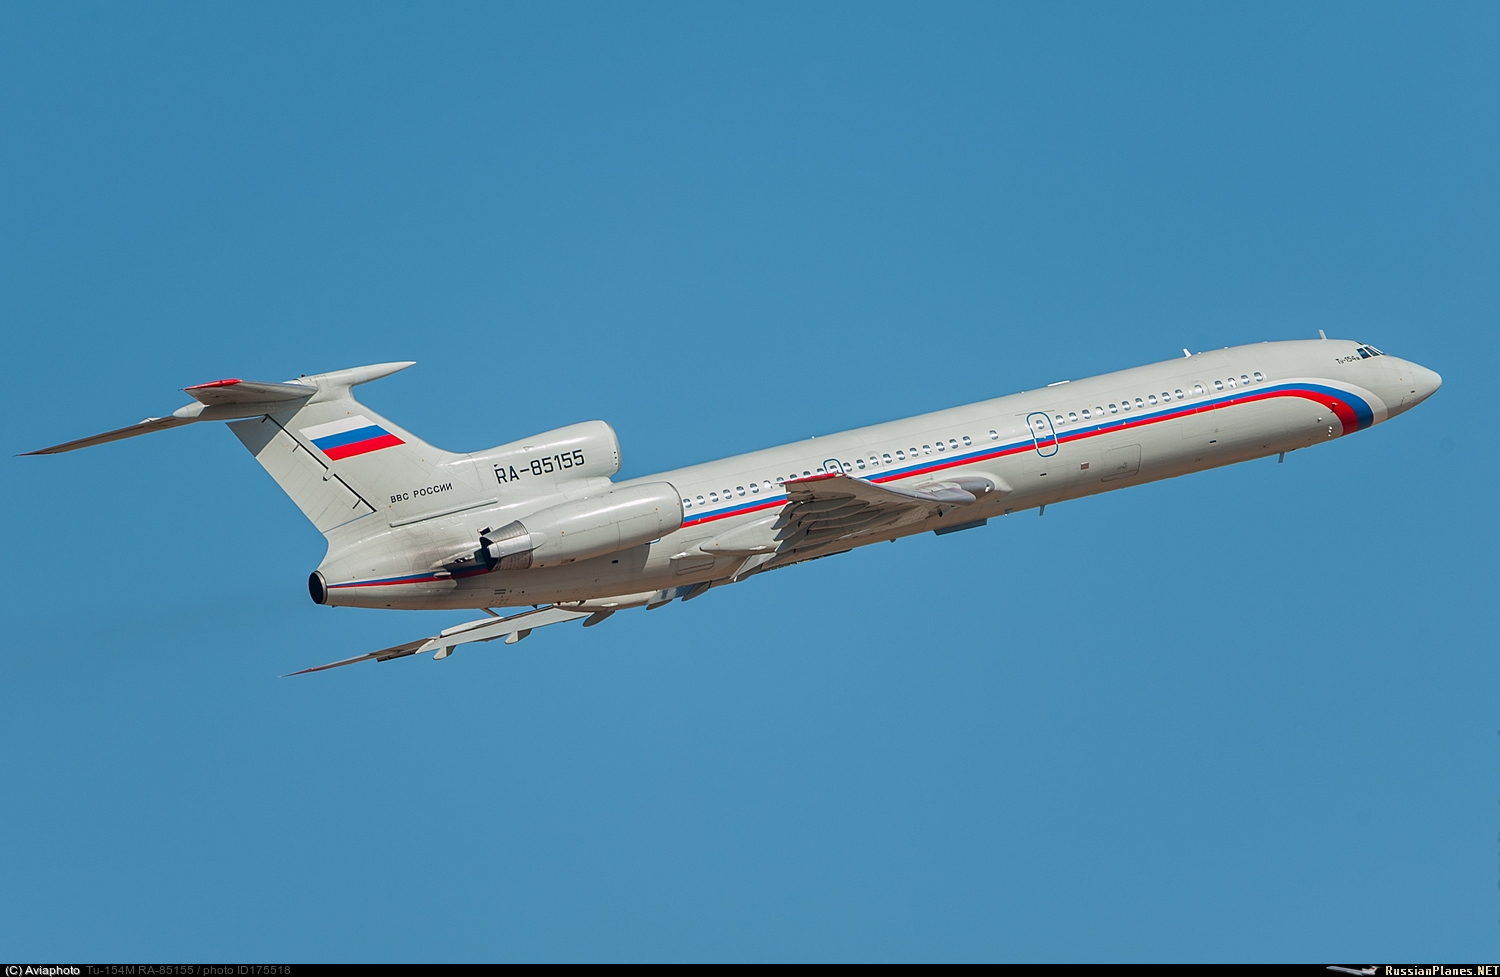 http://russianplanes.net/images/to176000/175518.jpg